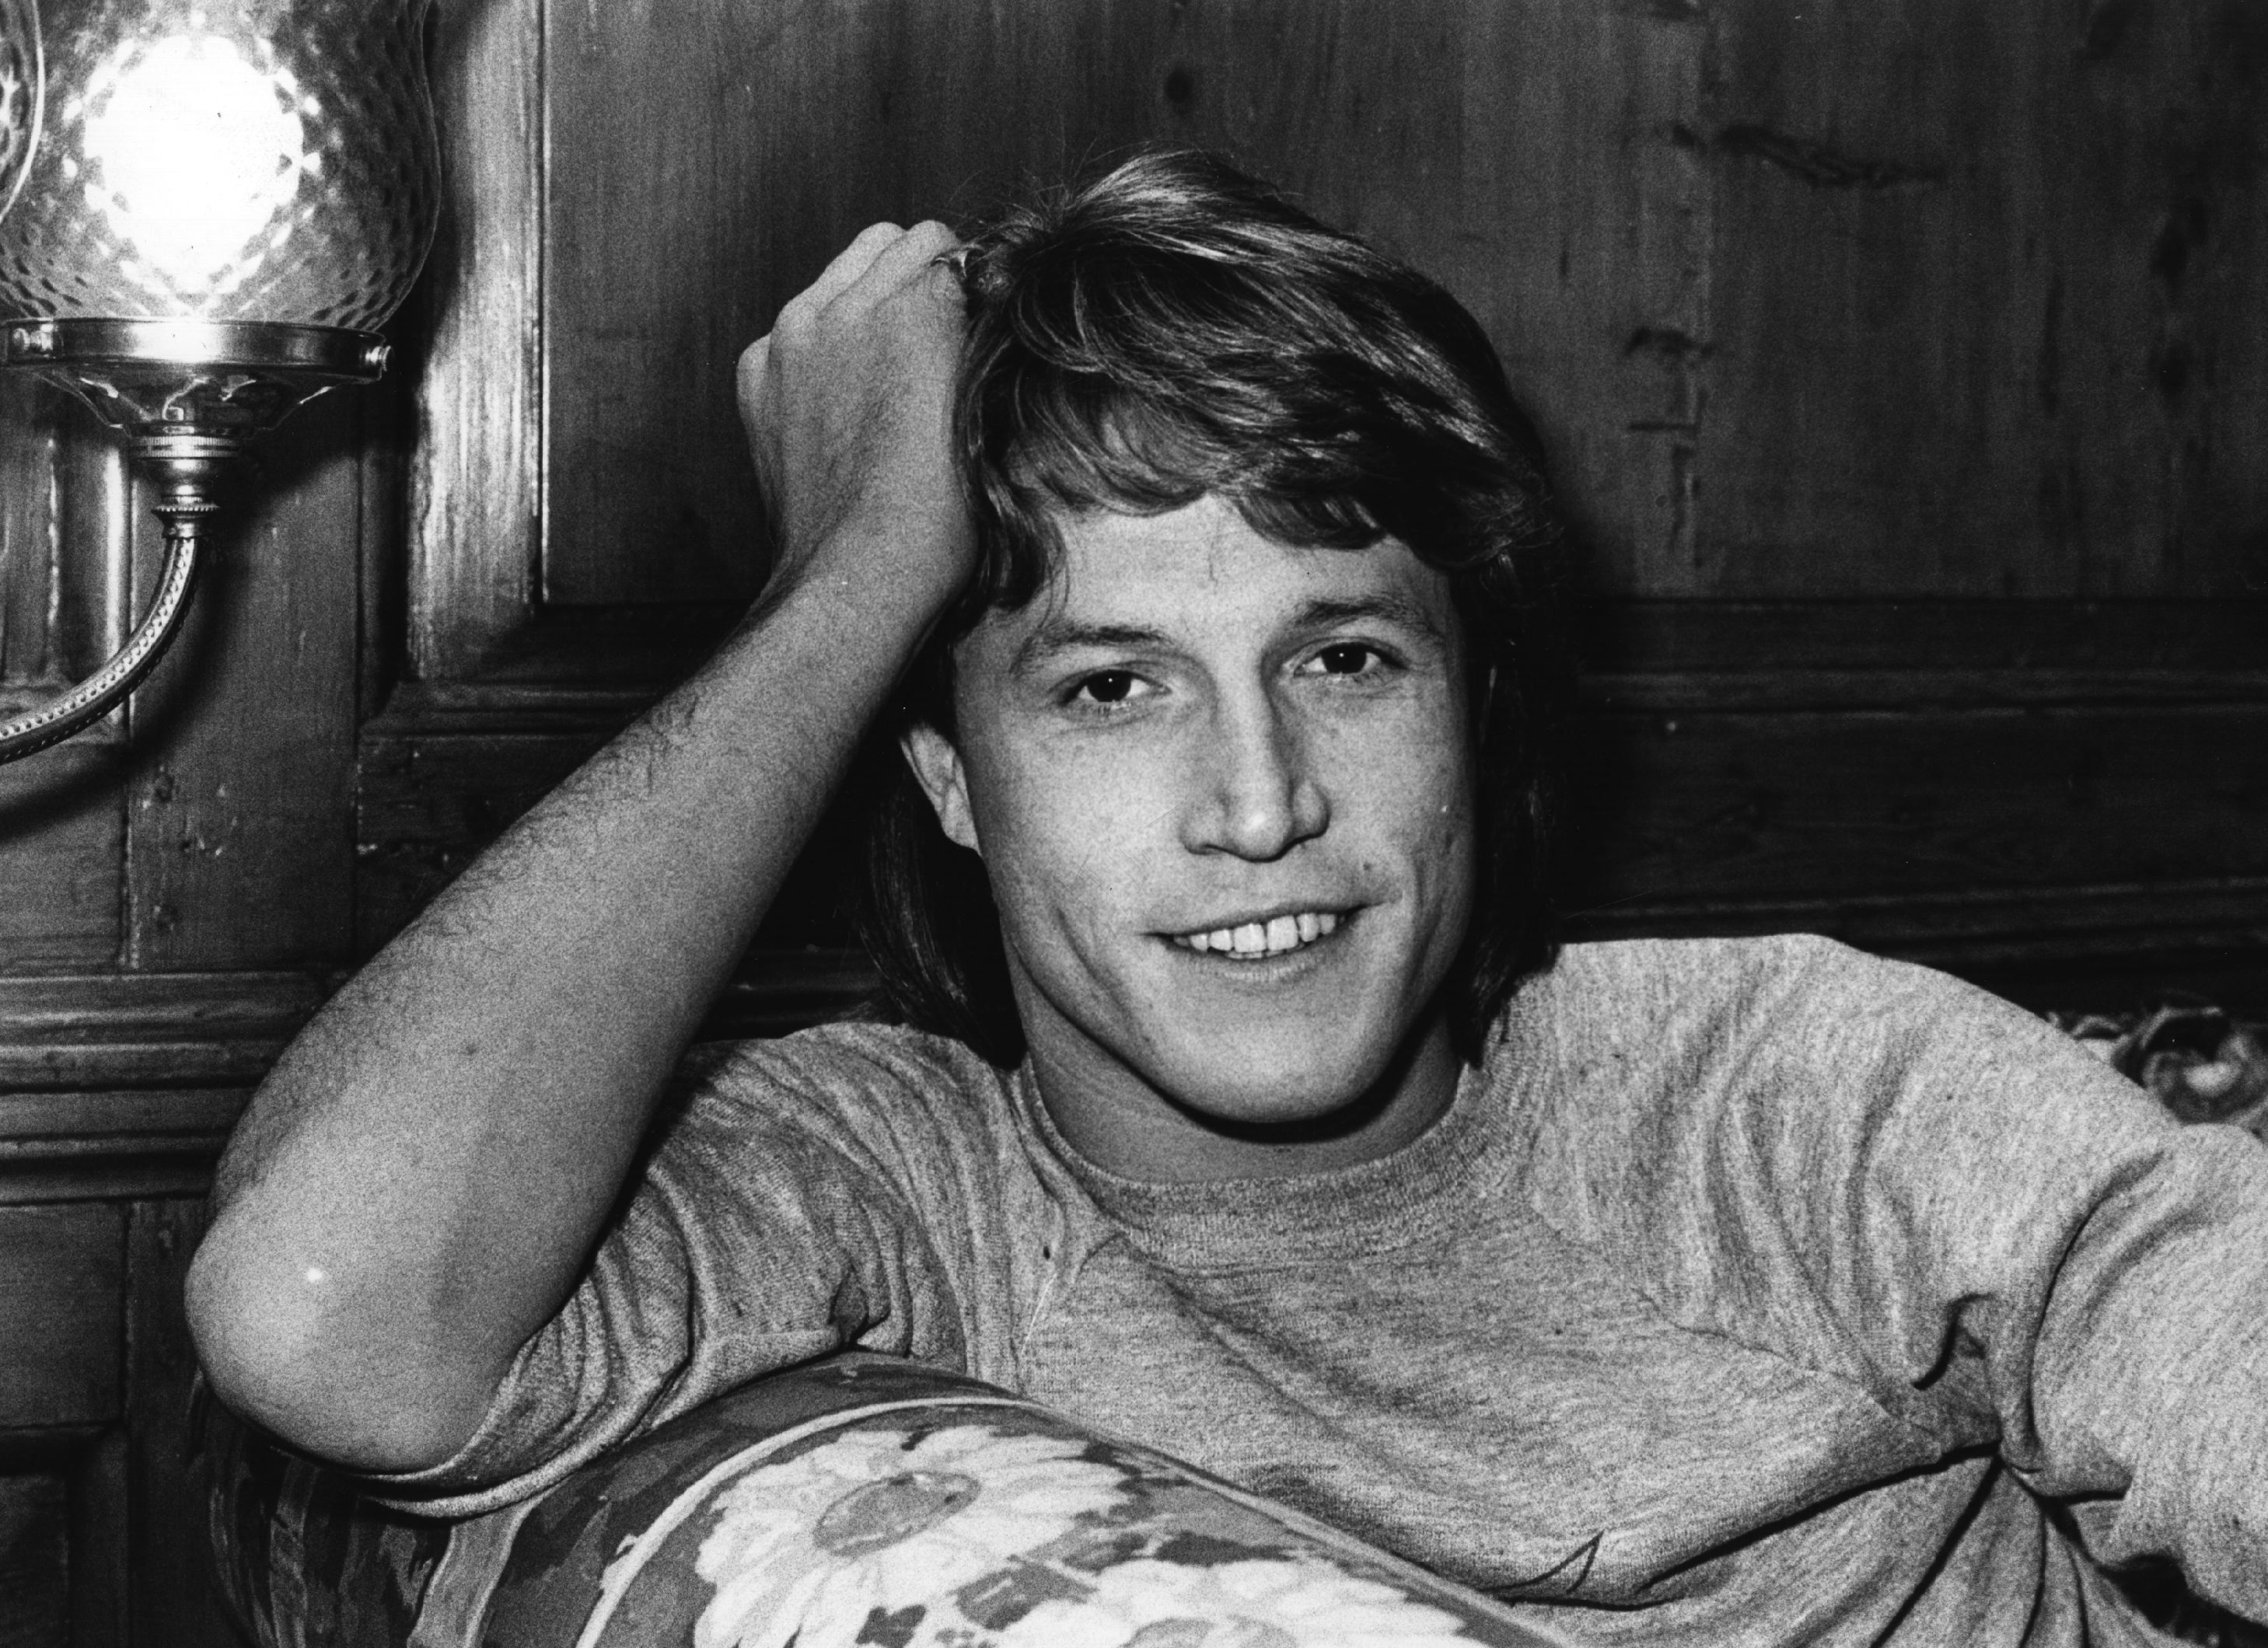 Andy Gibb, February 27, 1980. | Source: Getty Images